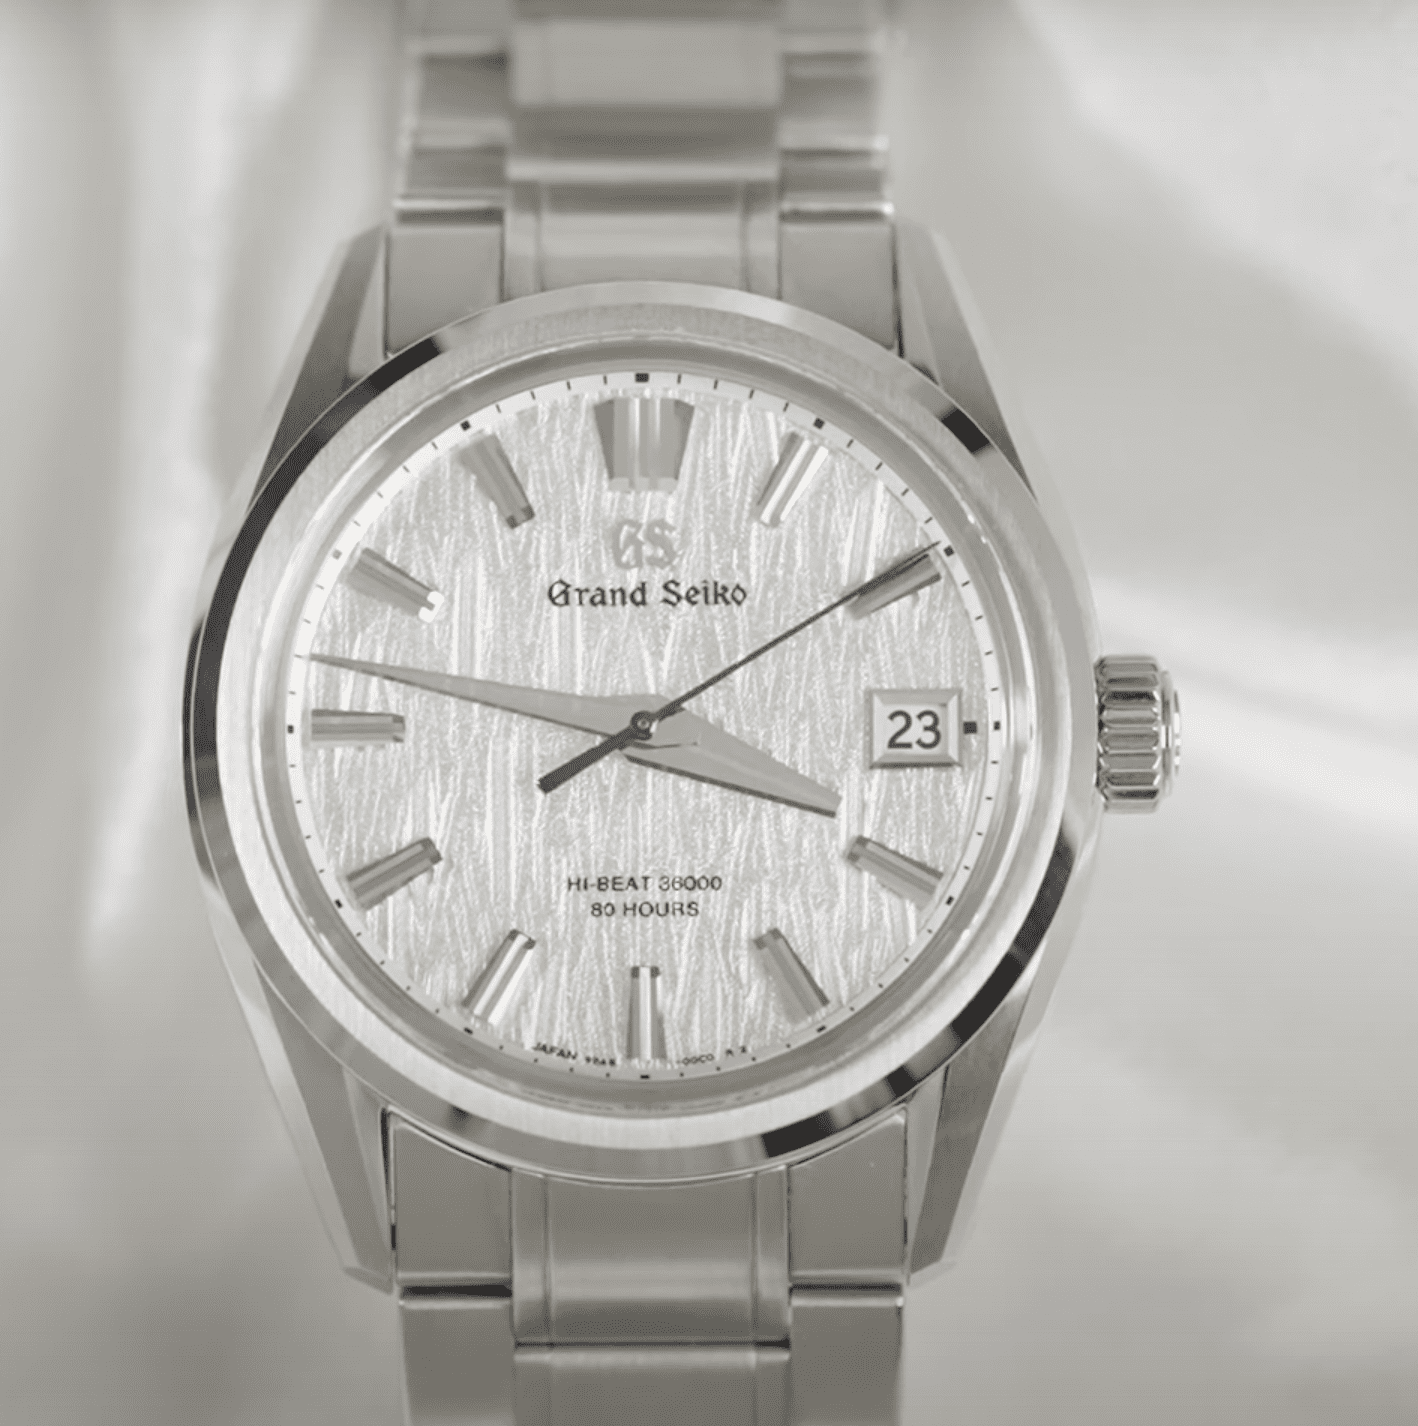 VIDEO: Why is the Grand Seiko SLGH005 White Birch causing waiting lists?